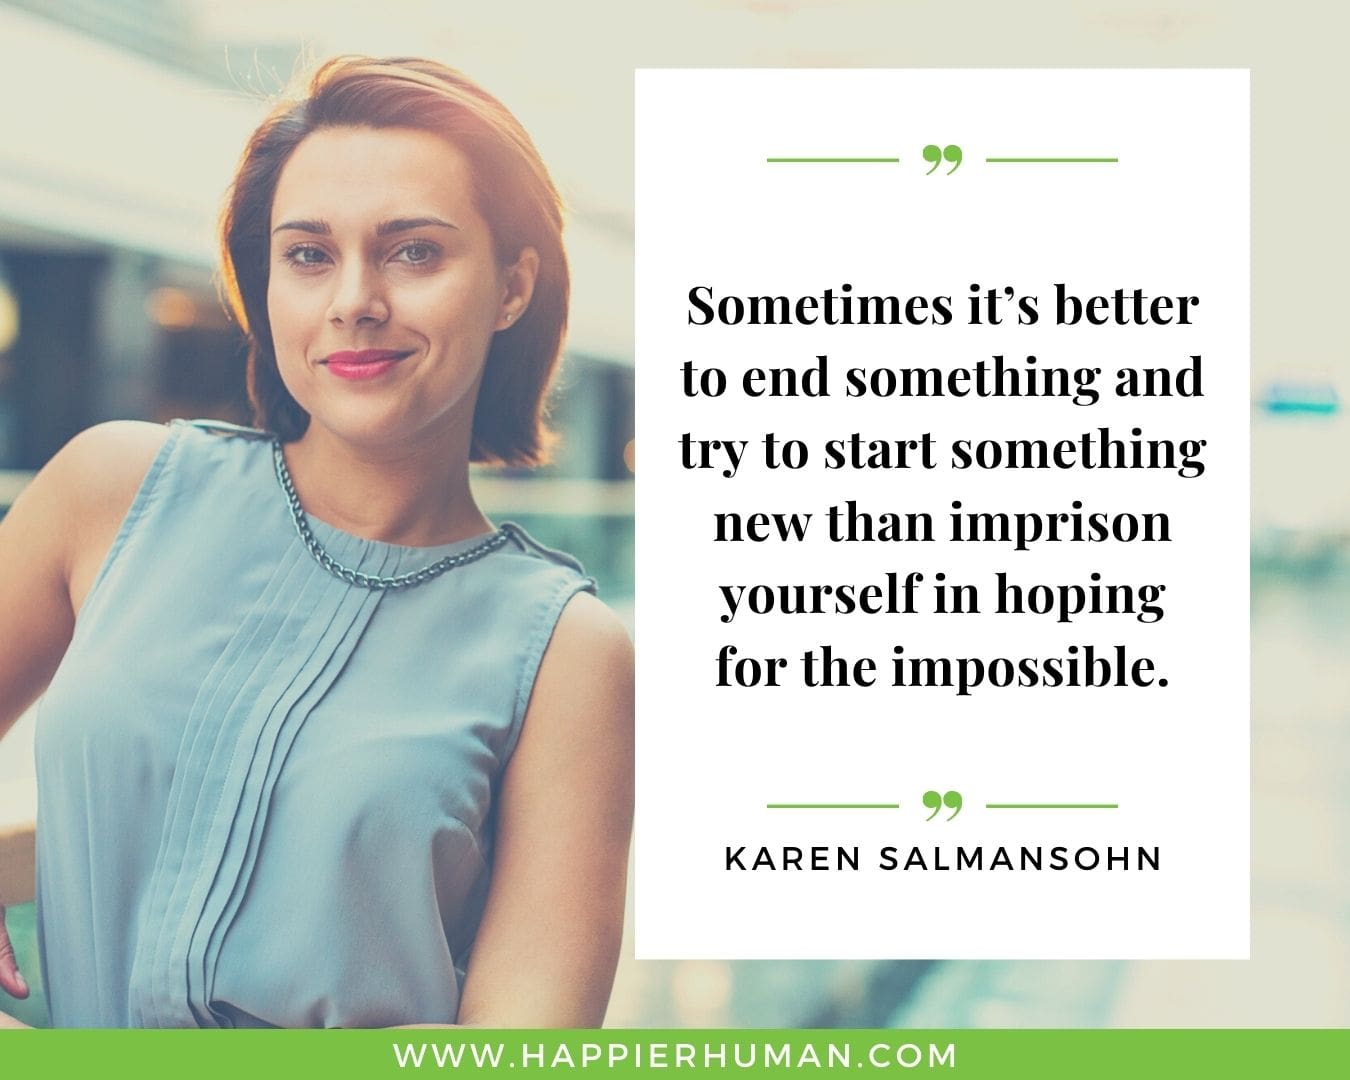 Toxic People Quotes - “Sometimes it’s better to end something and try to start something new than imprison yourself in hoping for the impossible.” – Karen Salmansohn